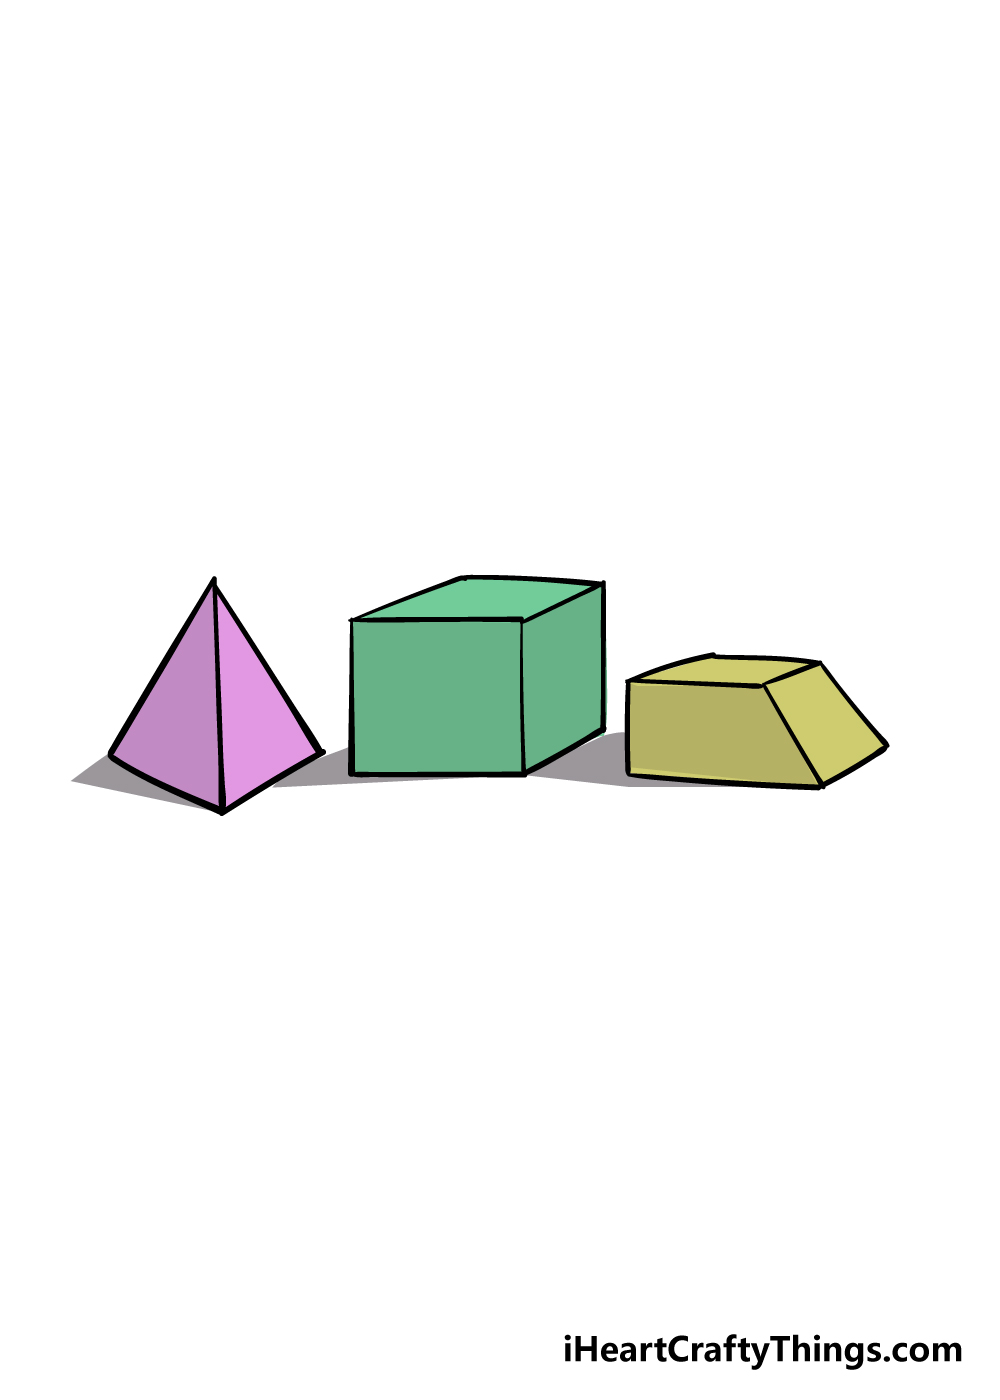 How to Draw 3D Shapes – A Step by Step Guide